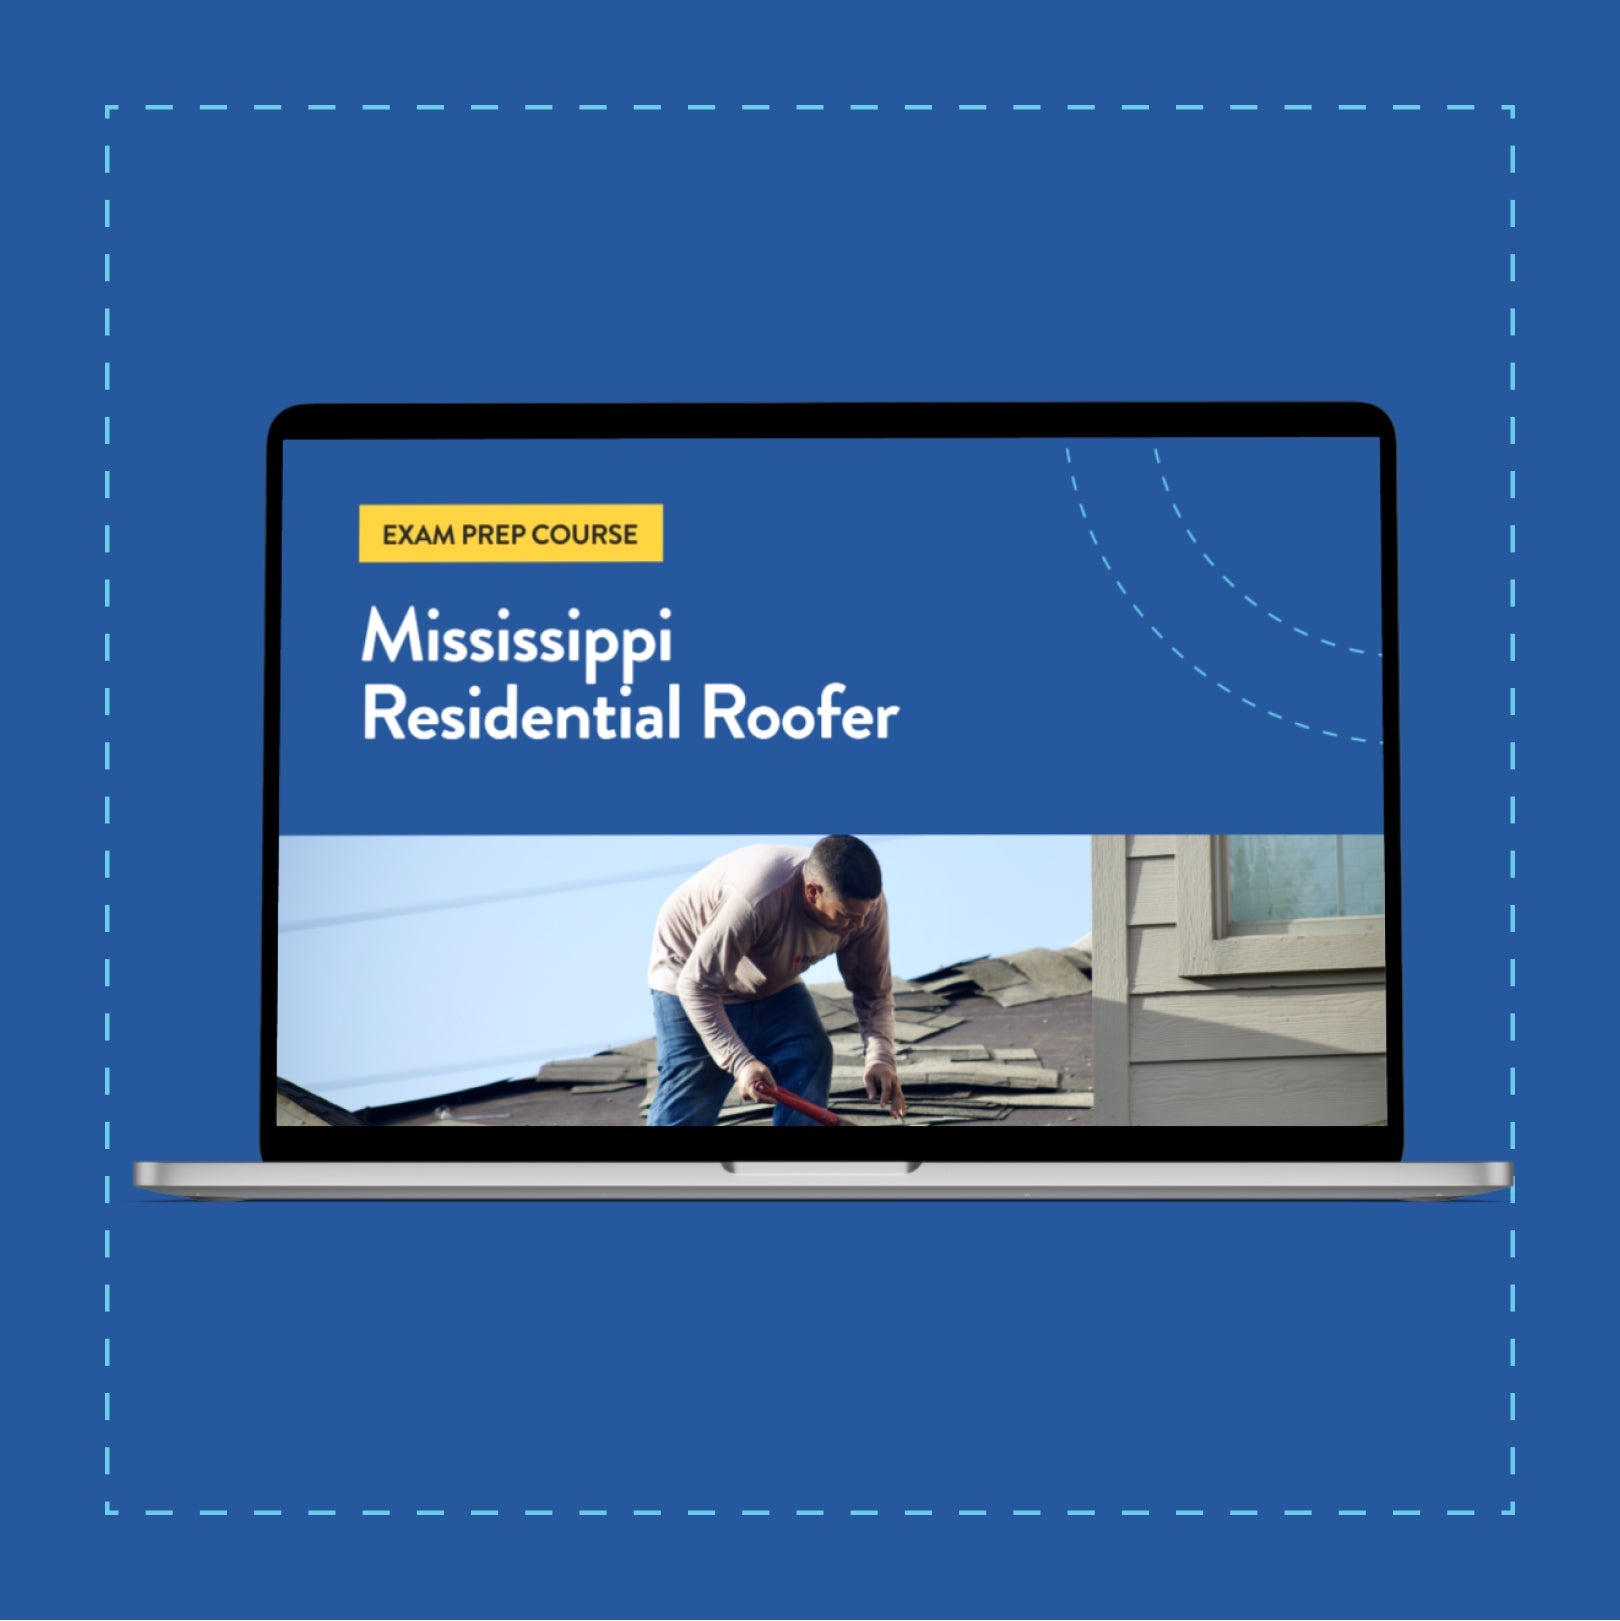 Mississippi Residential Roofer Exam Prep Course